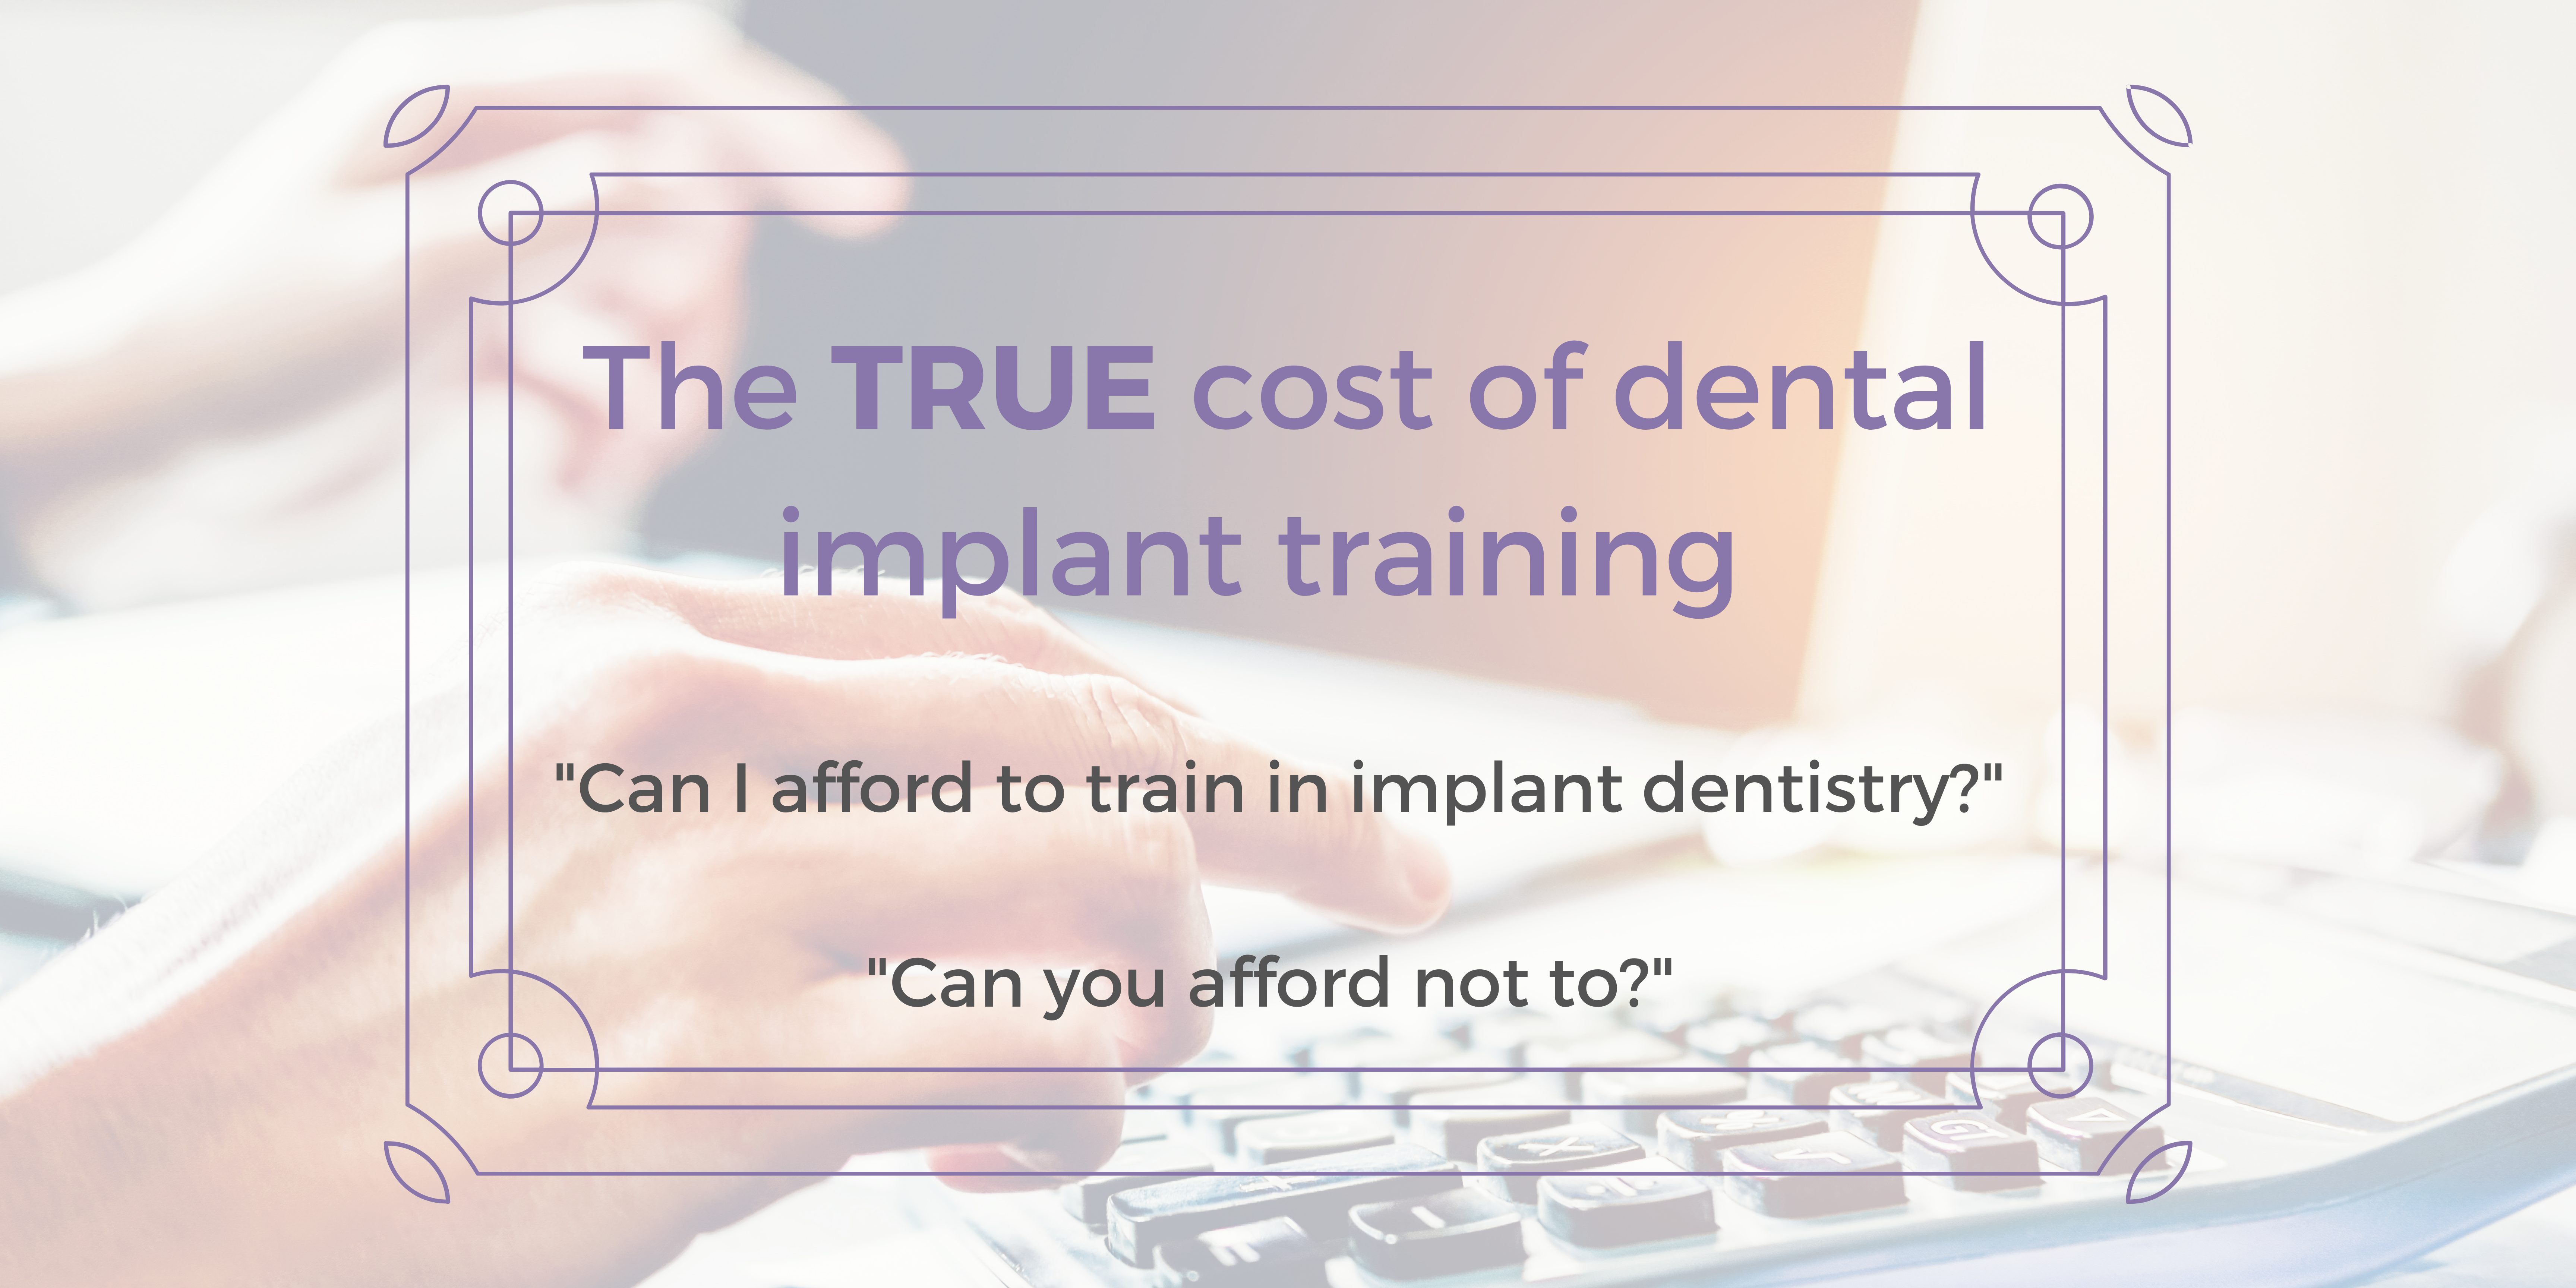 The ‘true cost’ of dental implant training